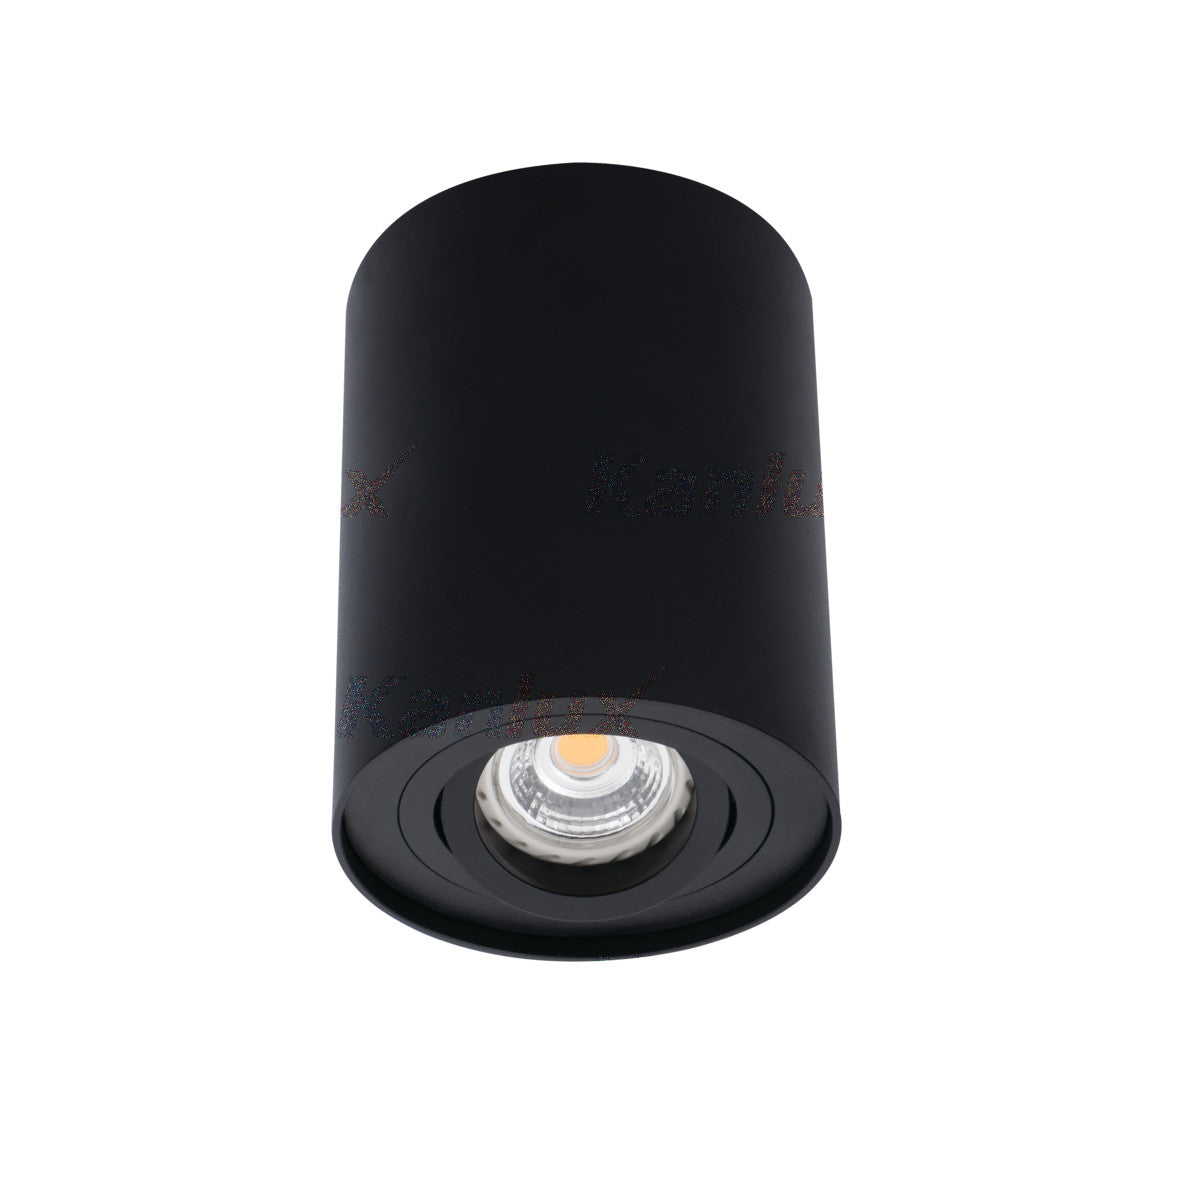 Kanlux BORD Single, Twin Surface Ceiling Mounted GU10 Light Fitting